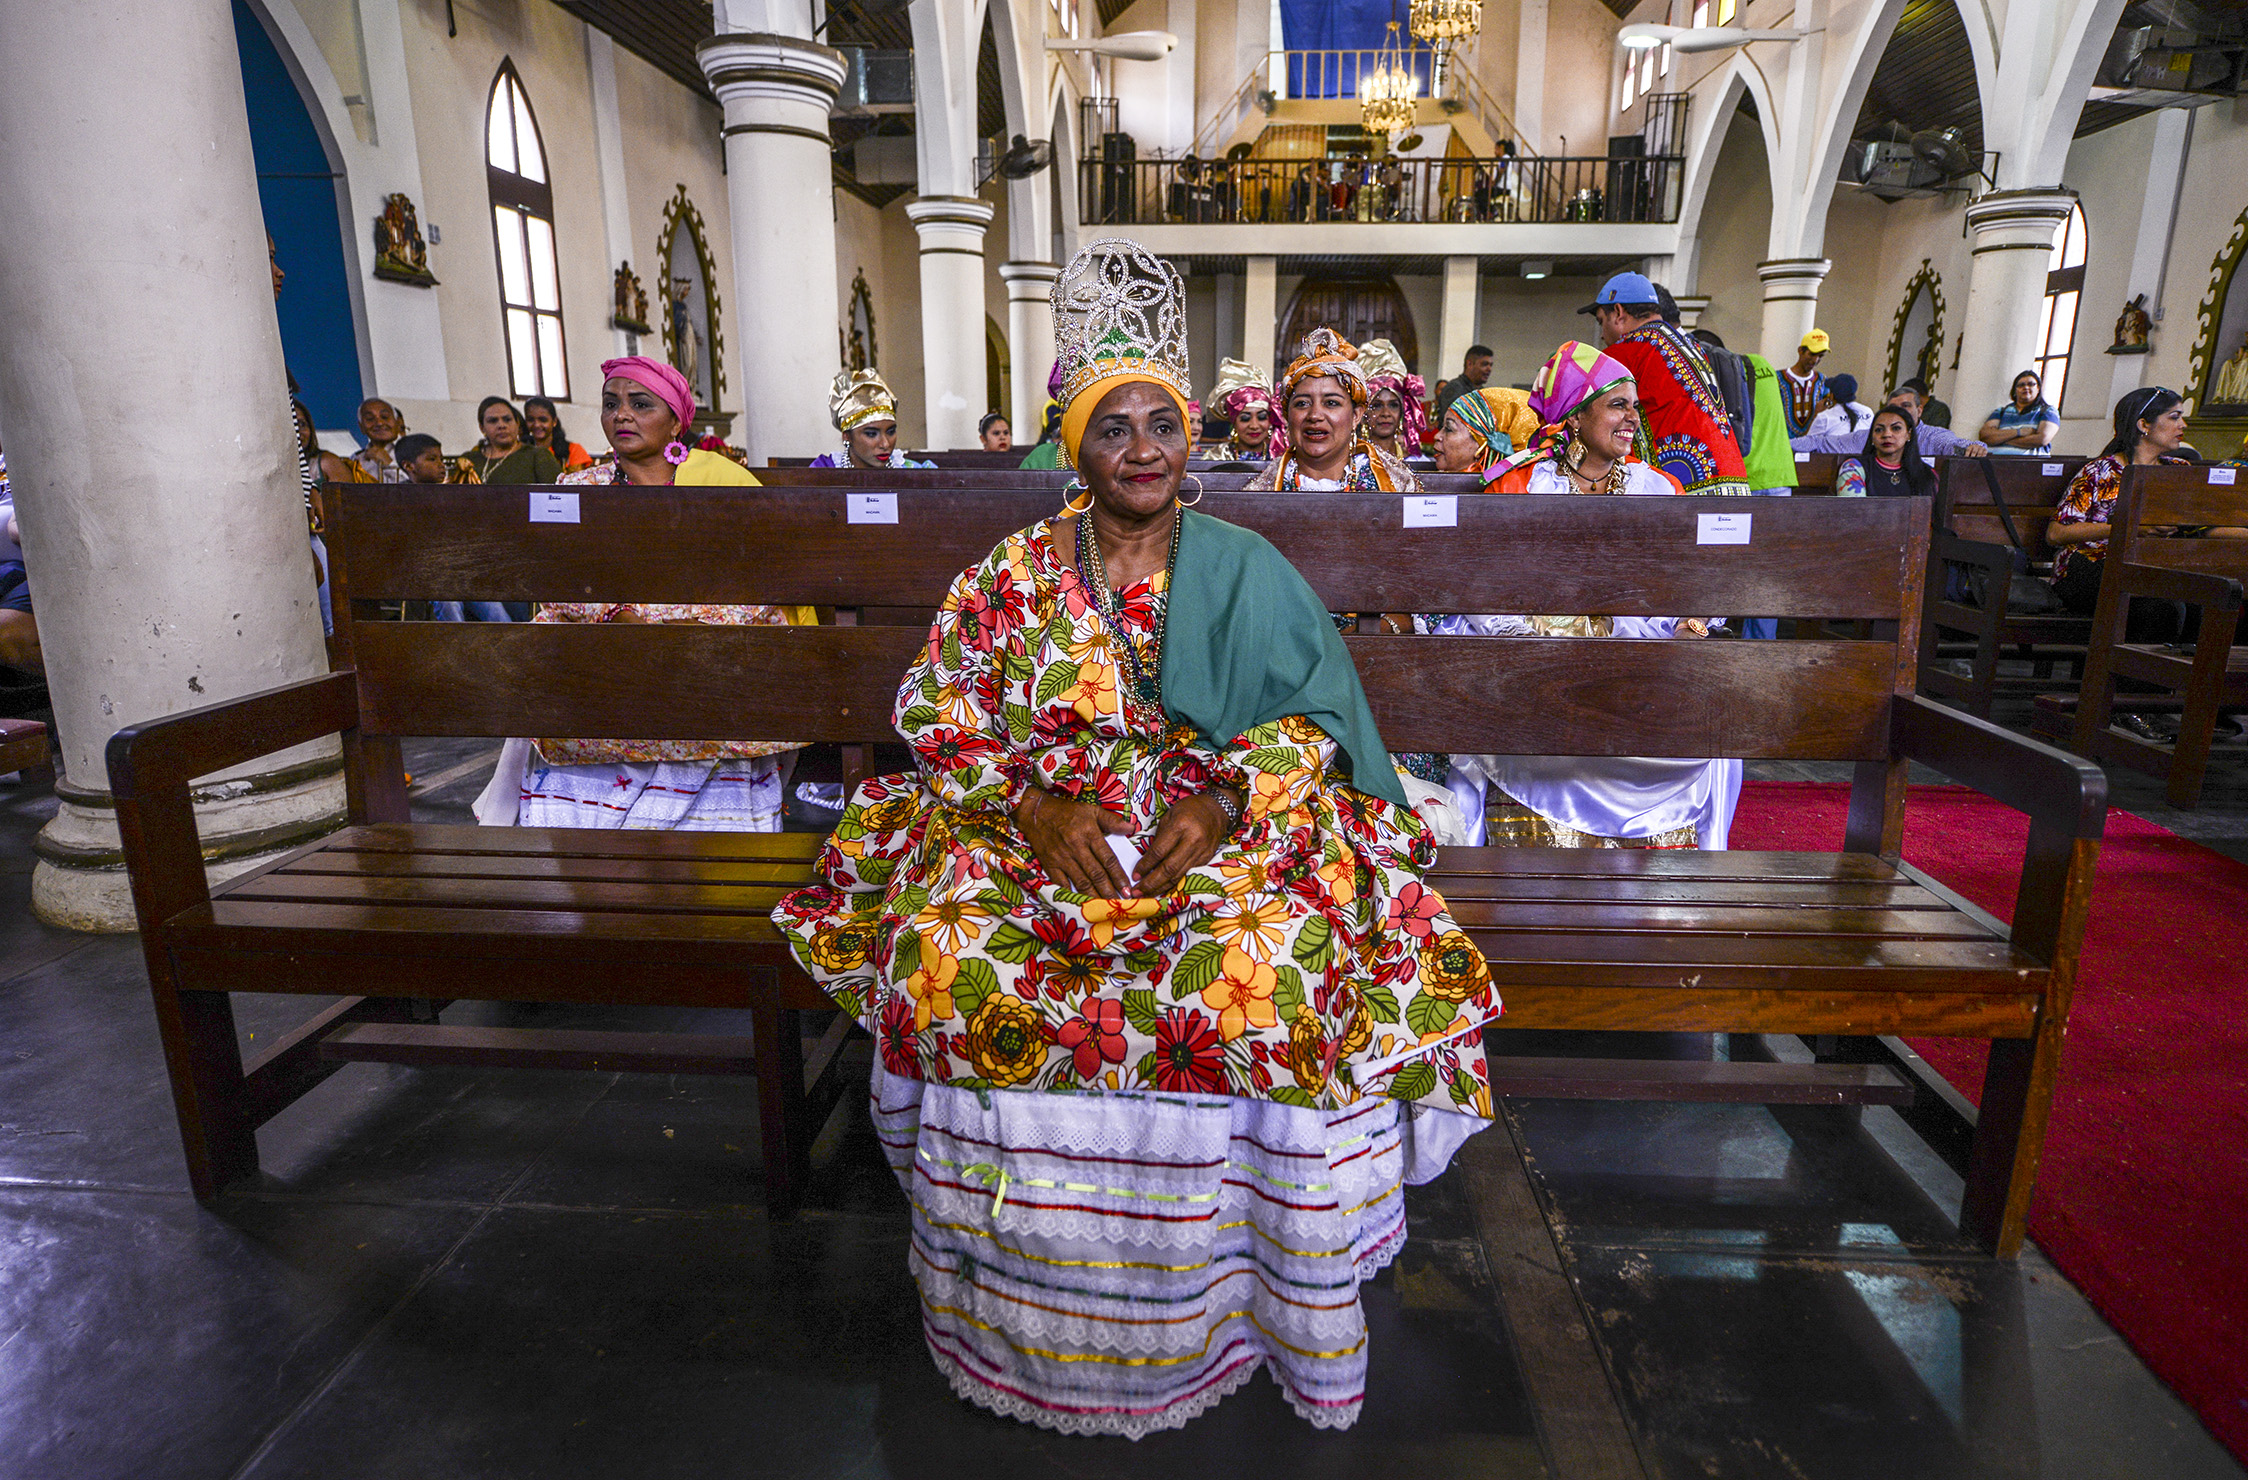 Women dressed as "madamas" attend a mass before the beginning of the Carnival in El Callao, in Bolivar state, Venezuela on February 26, 2017.  El Callao's carnival was recently named Unesco's Intangible Cultural Heritage of Humanity and is led by the madamas, the pillars of Callaoense identity representing Antillean matrons considered the communicators of values, who dance and wear colourful dresses. / AFP PHOTO / JUAN BARRETO